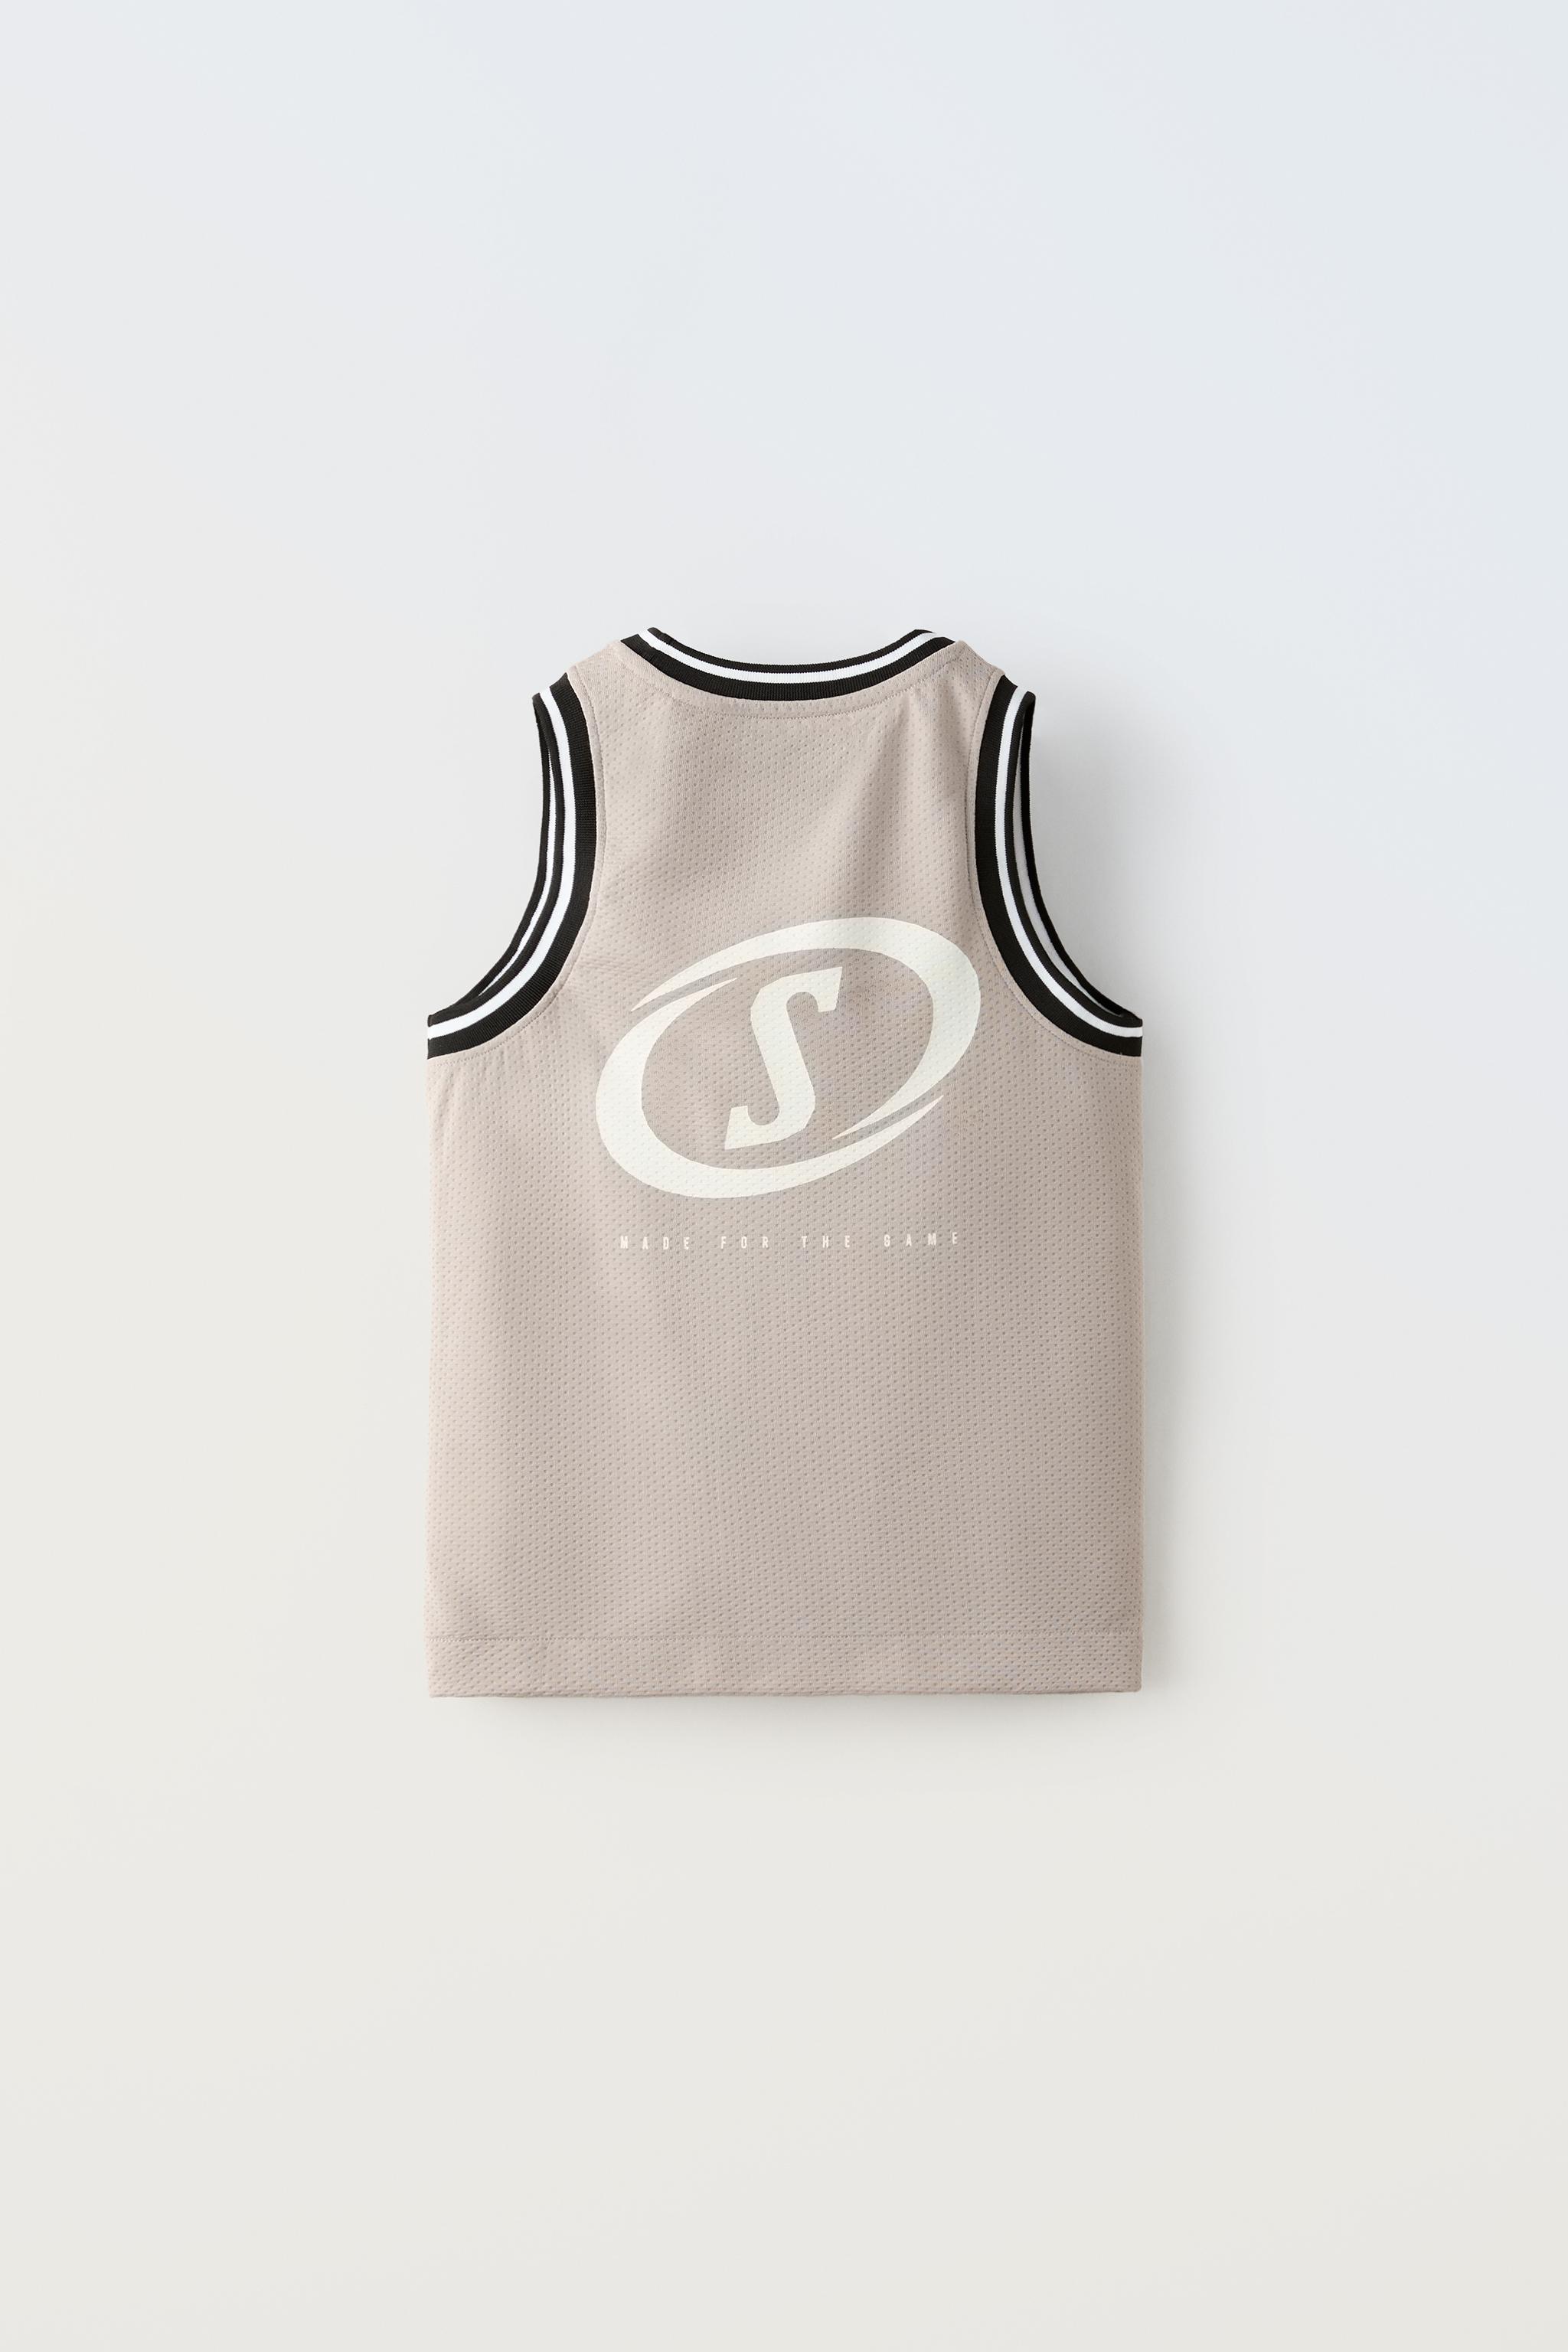 SPALDING ® PIPED TANK TOP - Taupe gray | ZARA United States